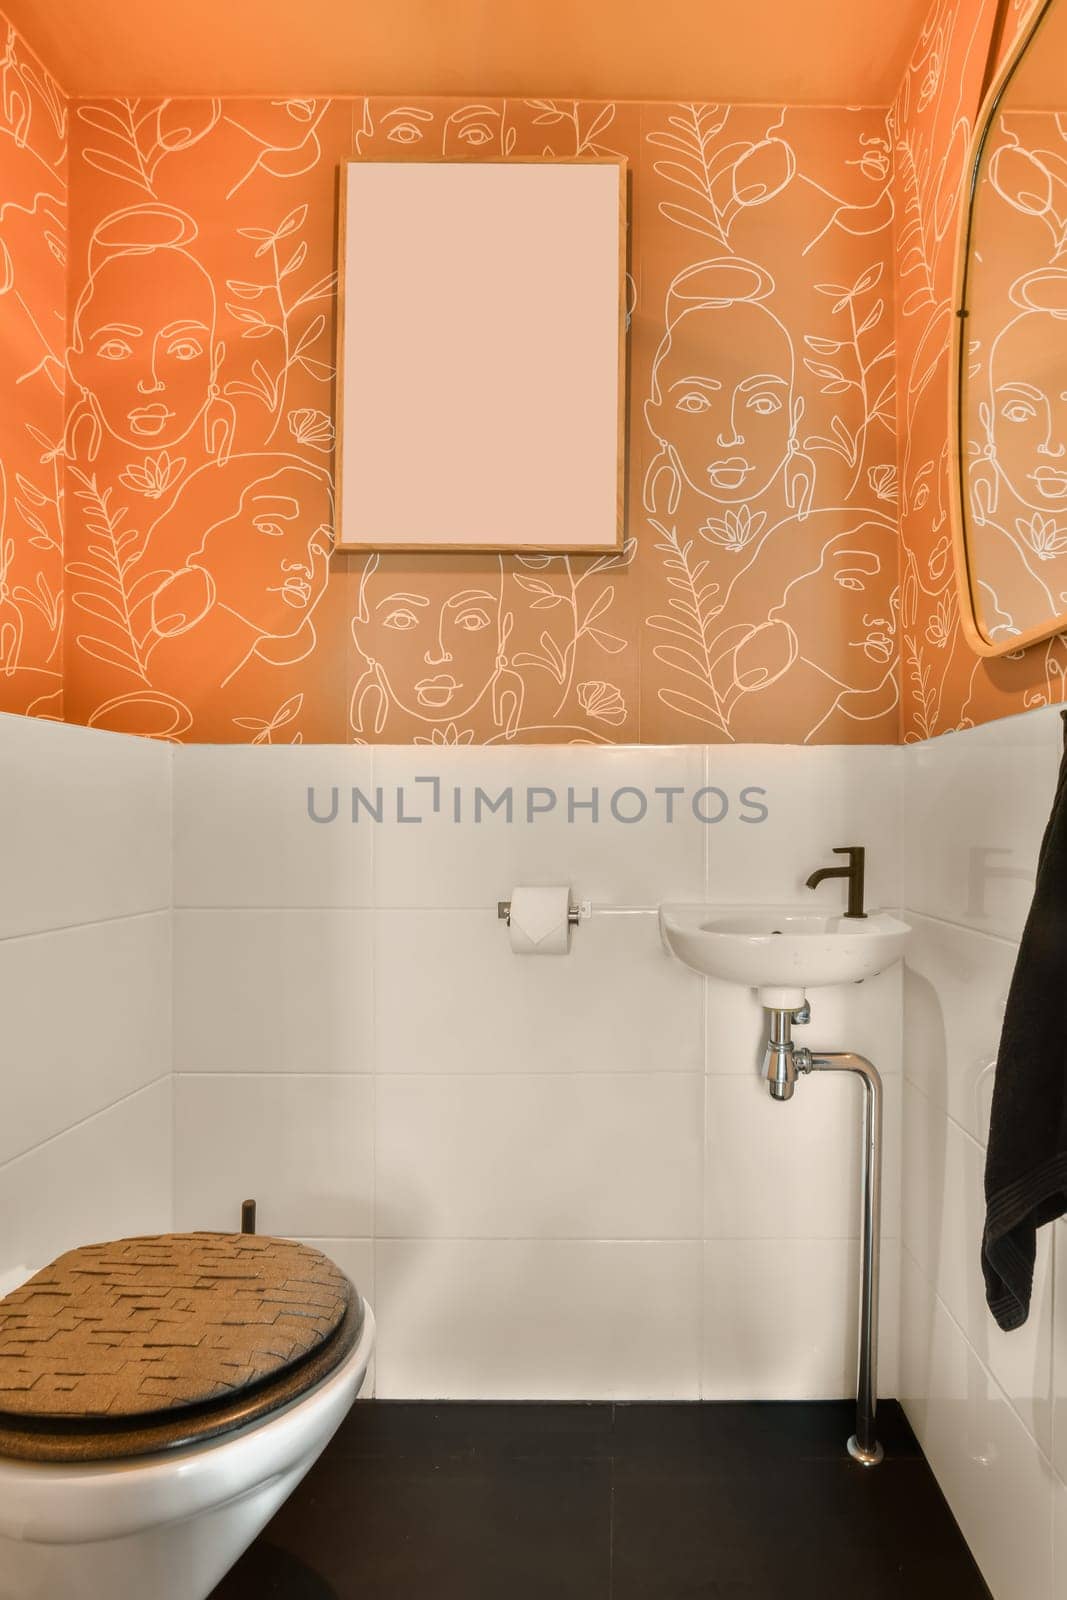 a bathroom with an orange wall and white tiles on the walls, along with a toilet in front of a mirror